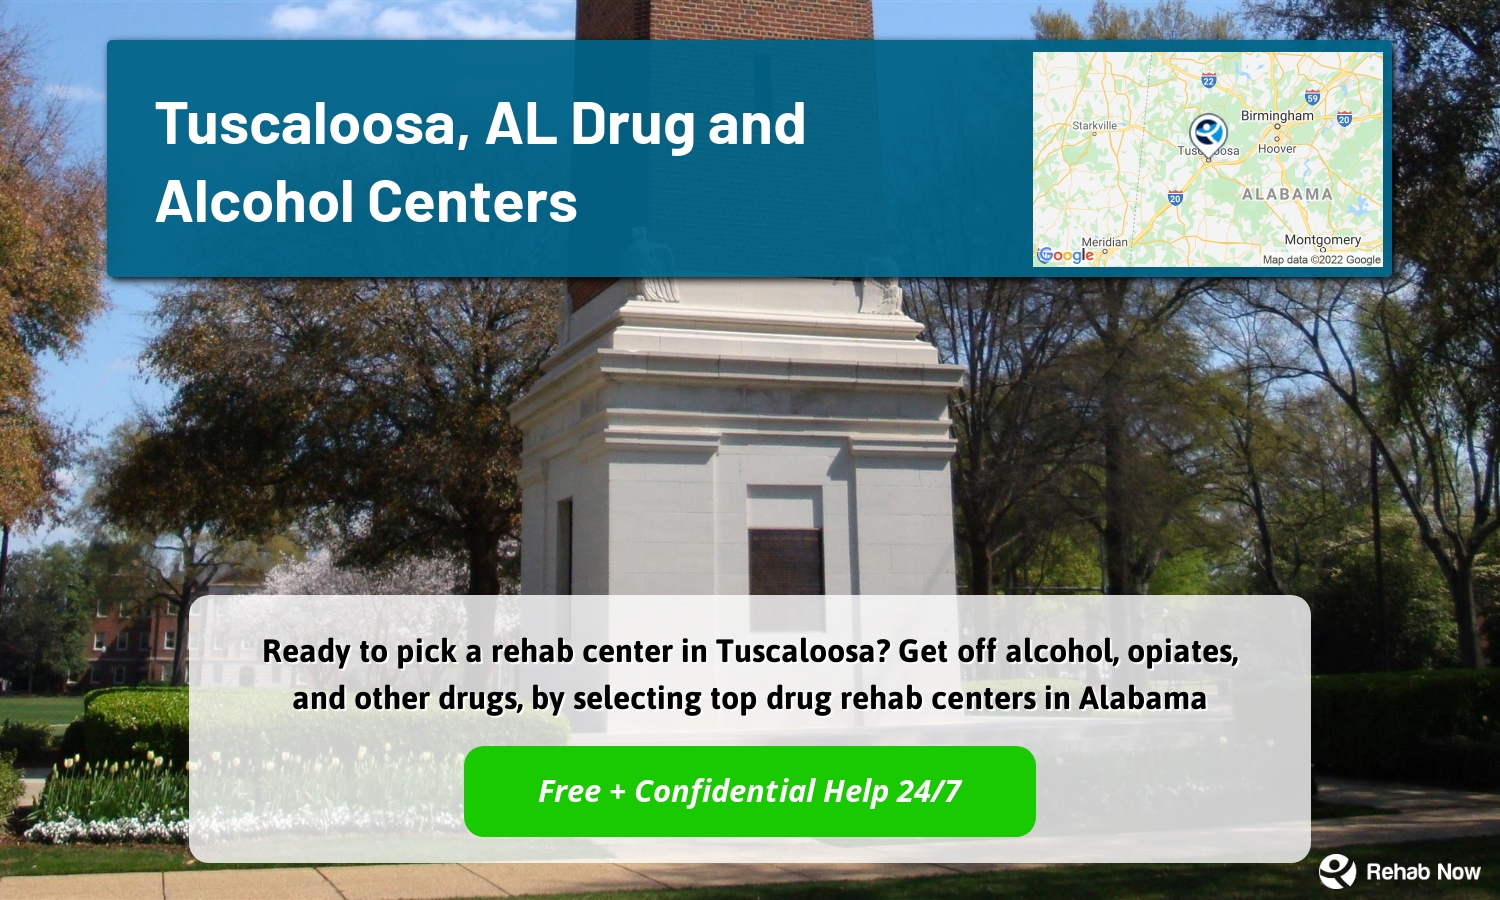 Ready to pick a rehab center in Tuscaloosa? Get off alcohol, opiates, and other drugs, by selecting top drug rehab centers in Alabama